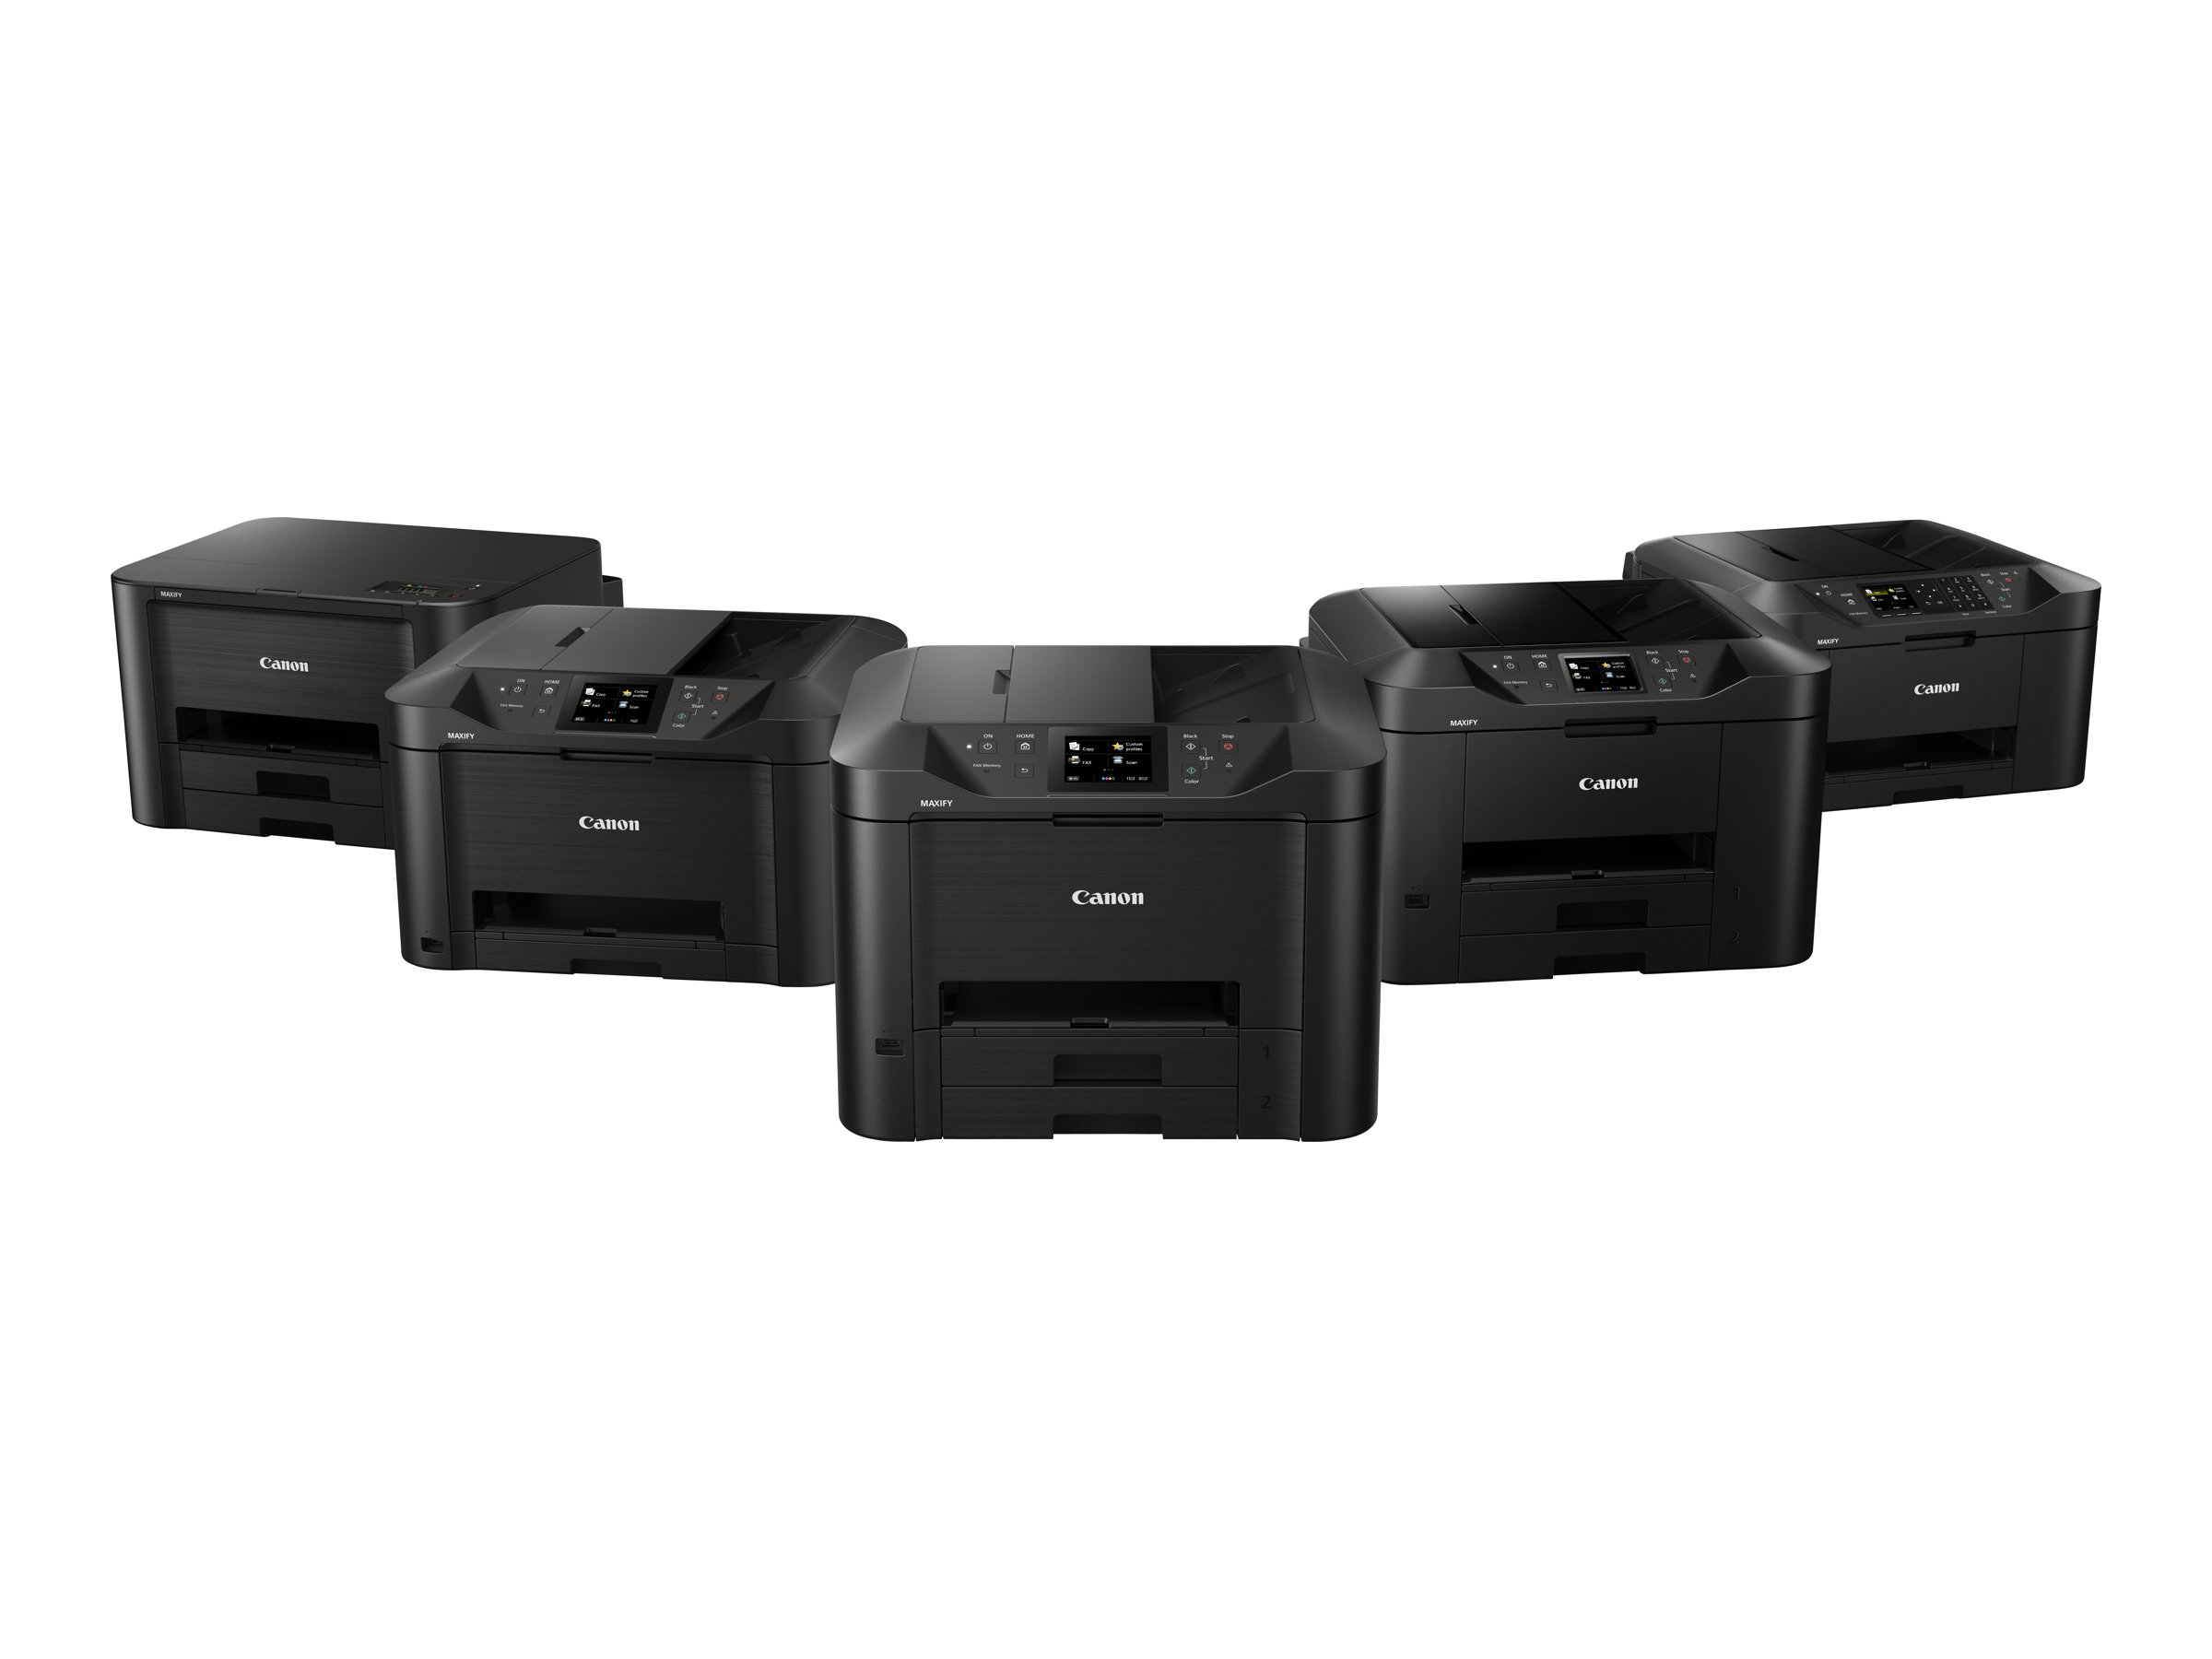 Canon Maxify MB2720 Wireless Home Office All-in-One Printer Review